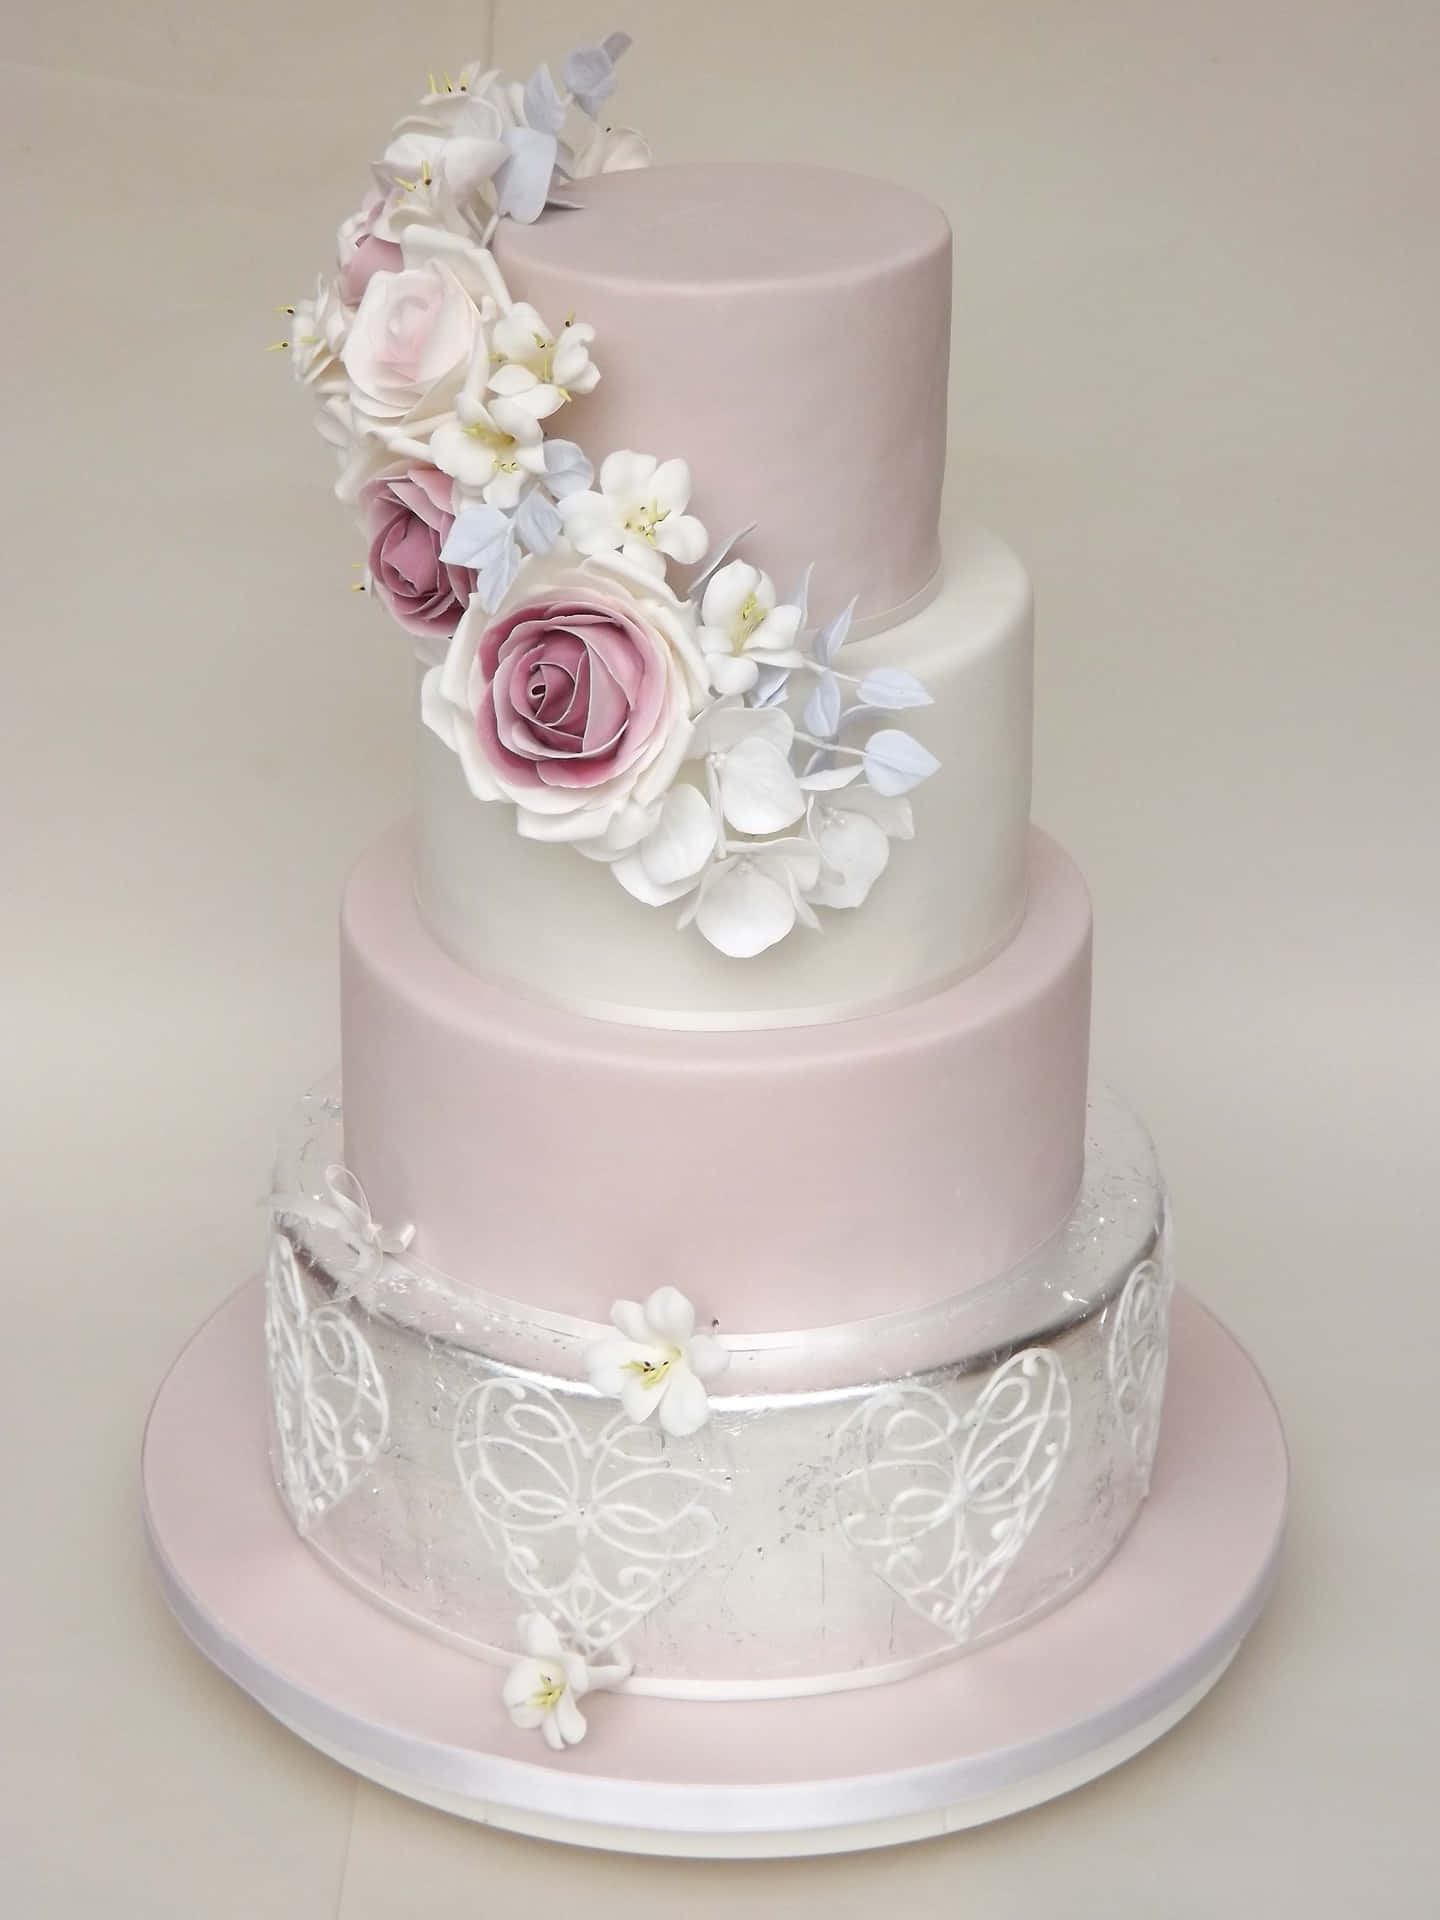 A Three Tier Cake With Pink Flowers And Silver Decorations